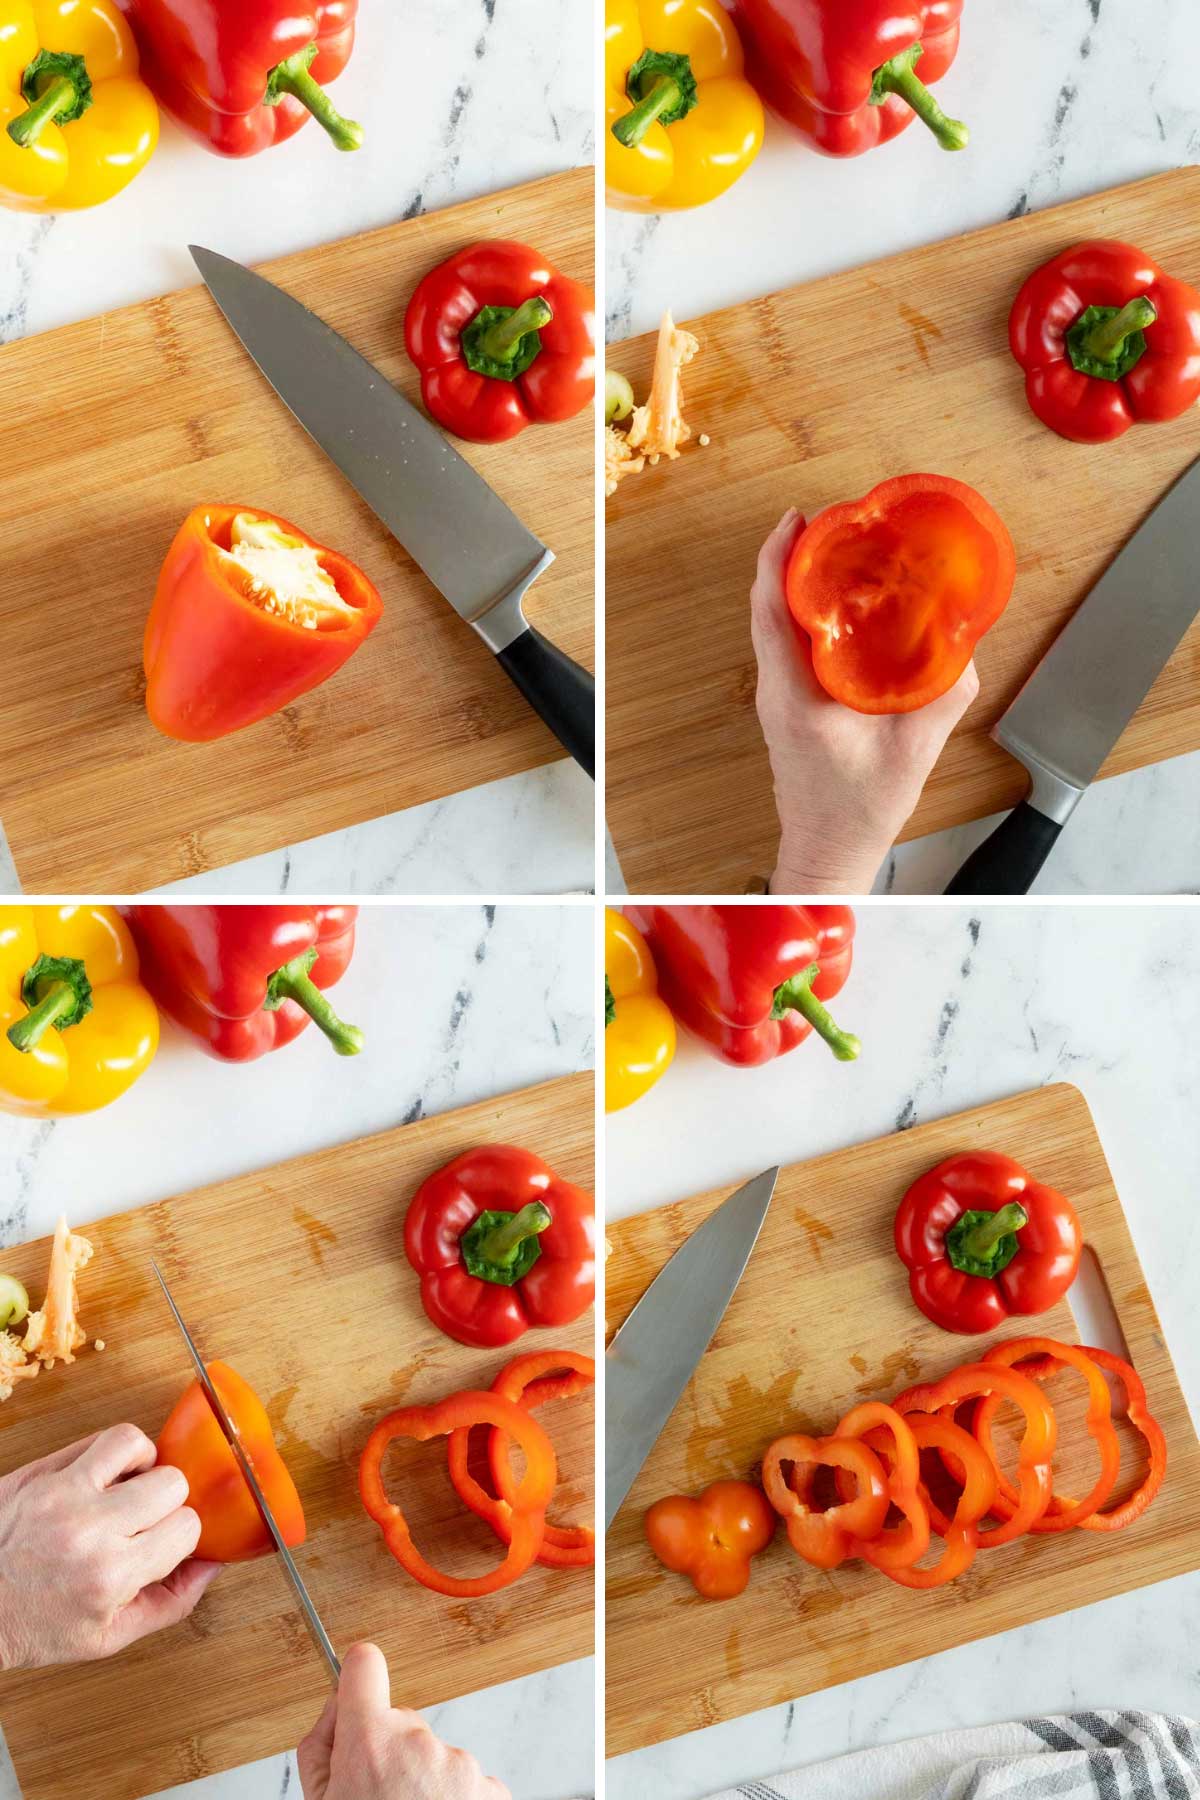 Cutting peppers into rings.